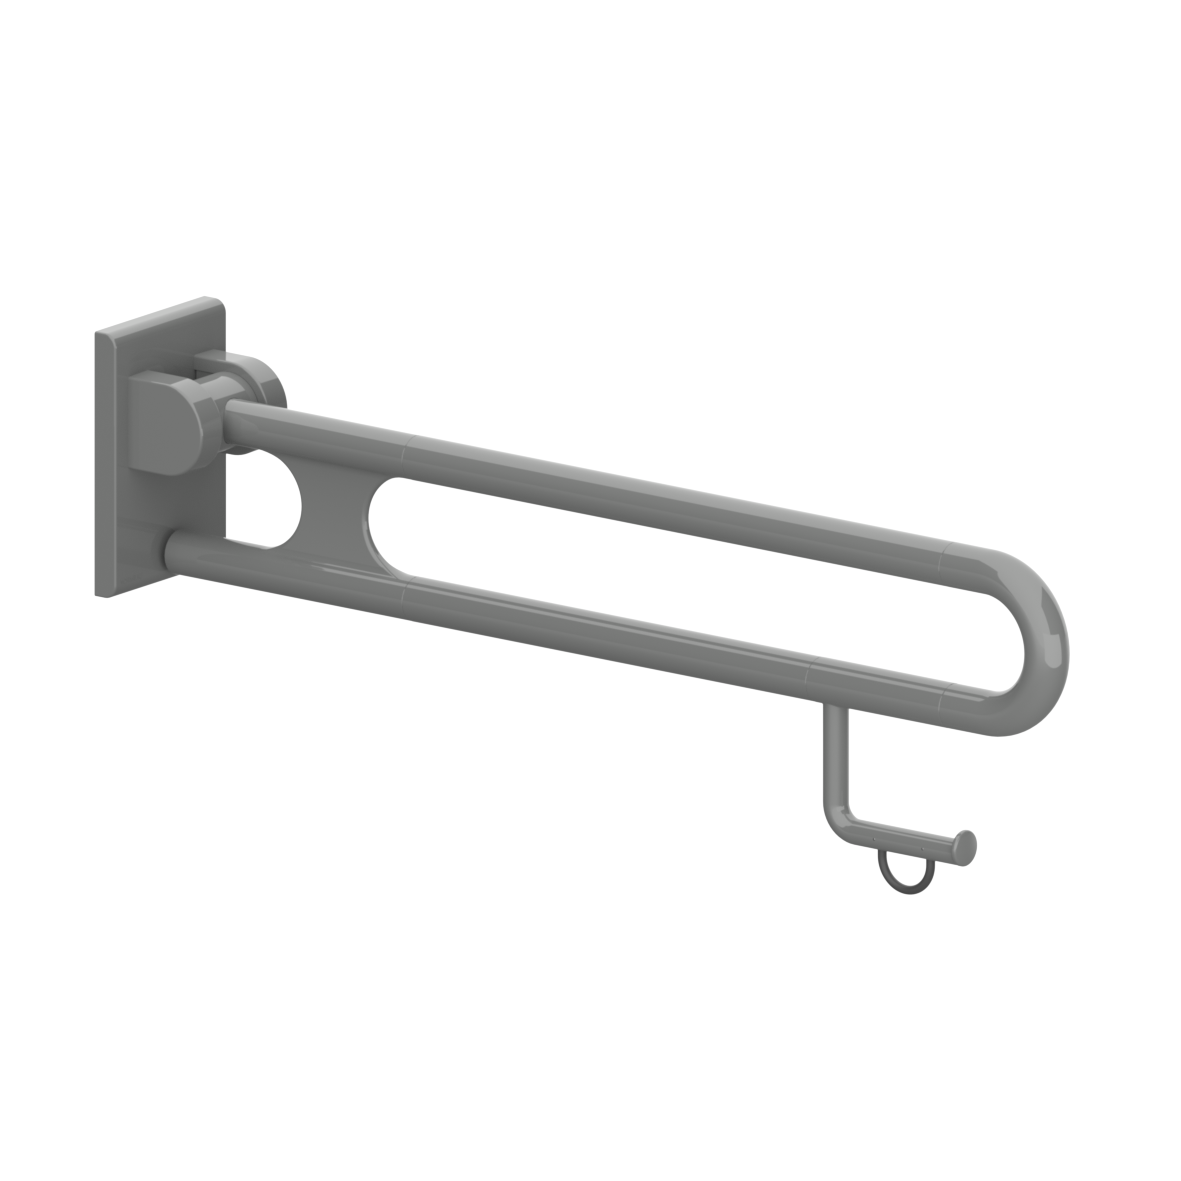 Nylon Care 300 Lift-up support rail, with Toilet roll holder, left and right, L = 850 mm, Dark grey